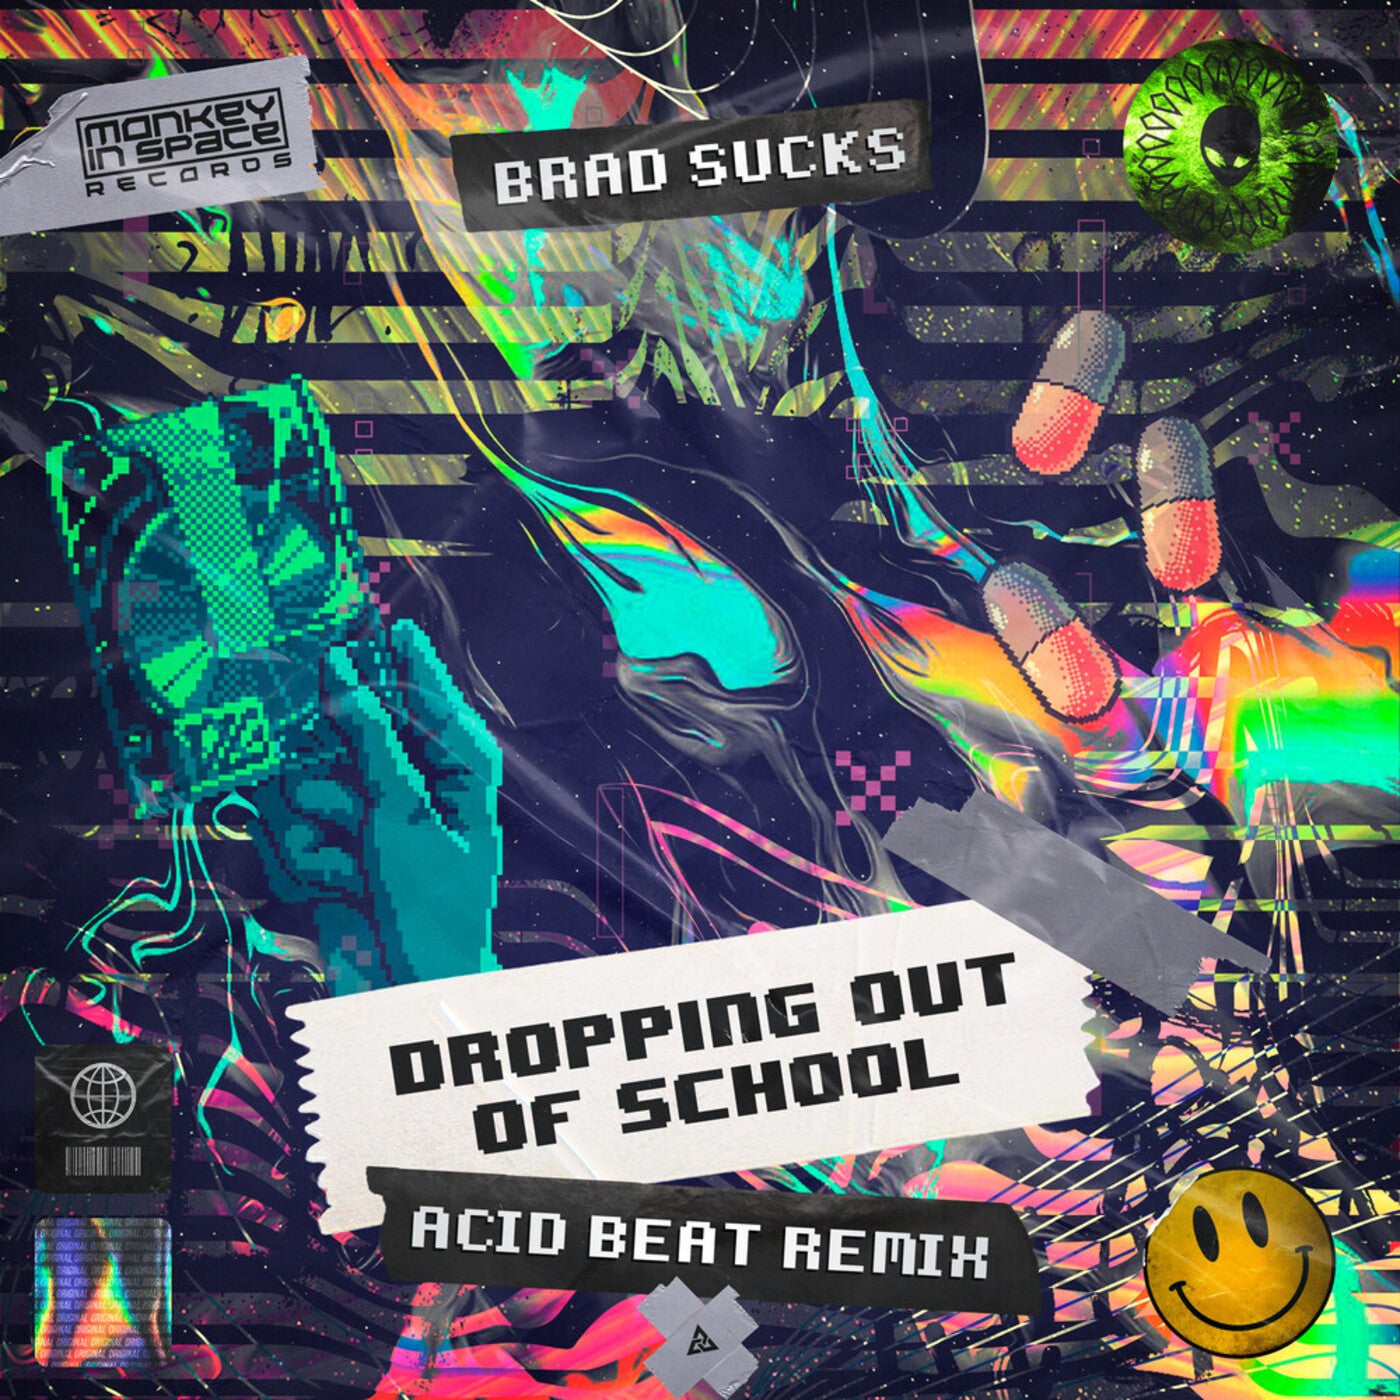 Out School (Acid Beat Remix) by Sucks on